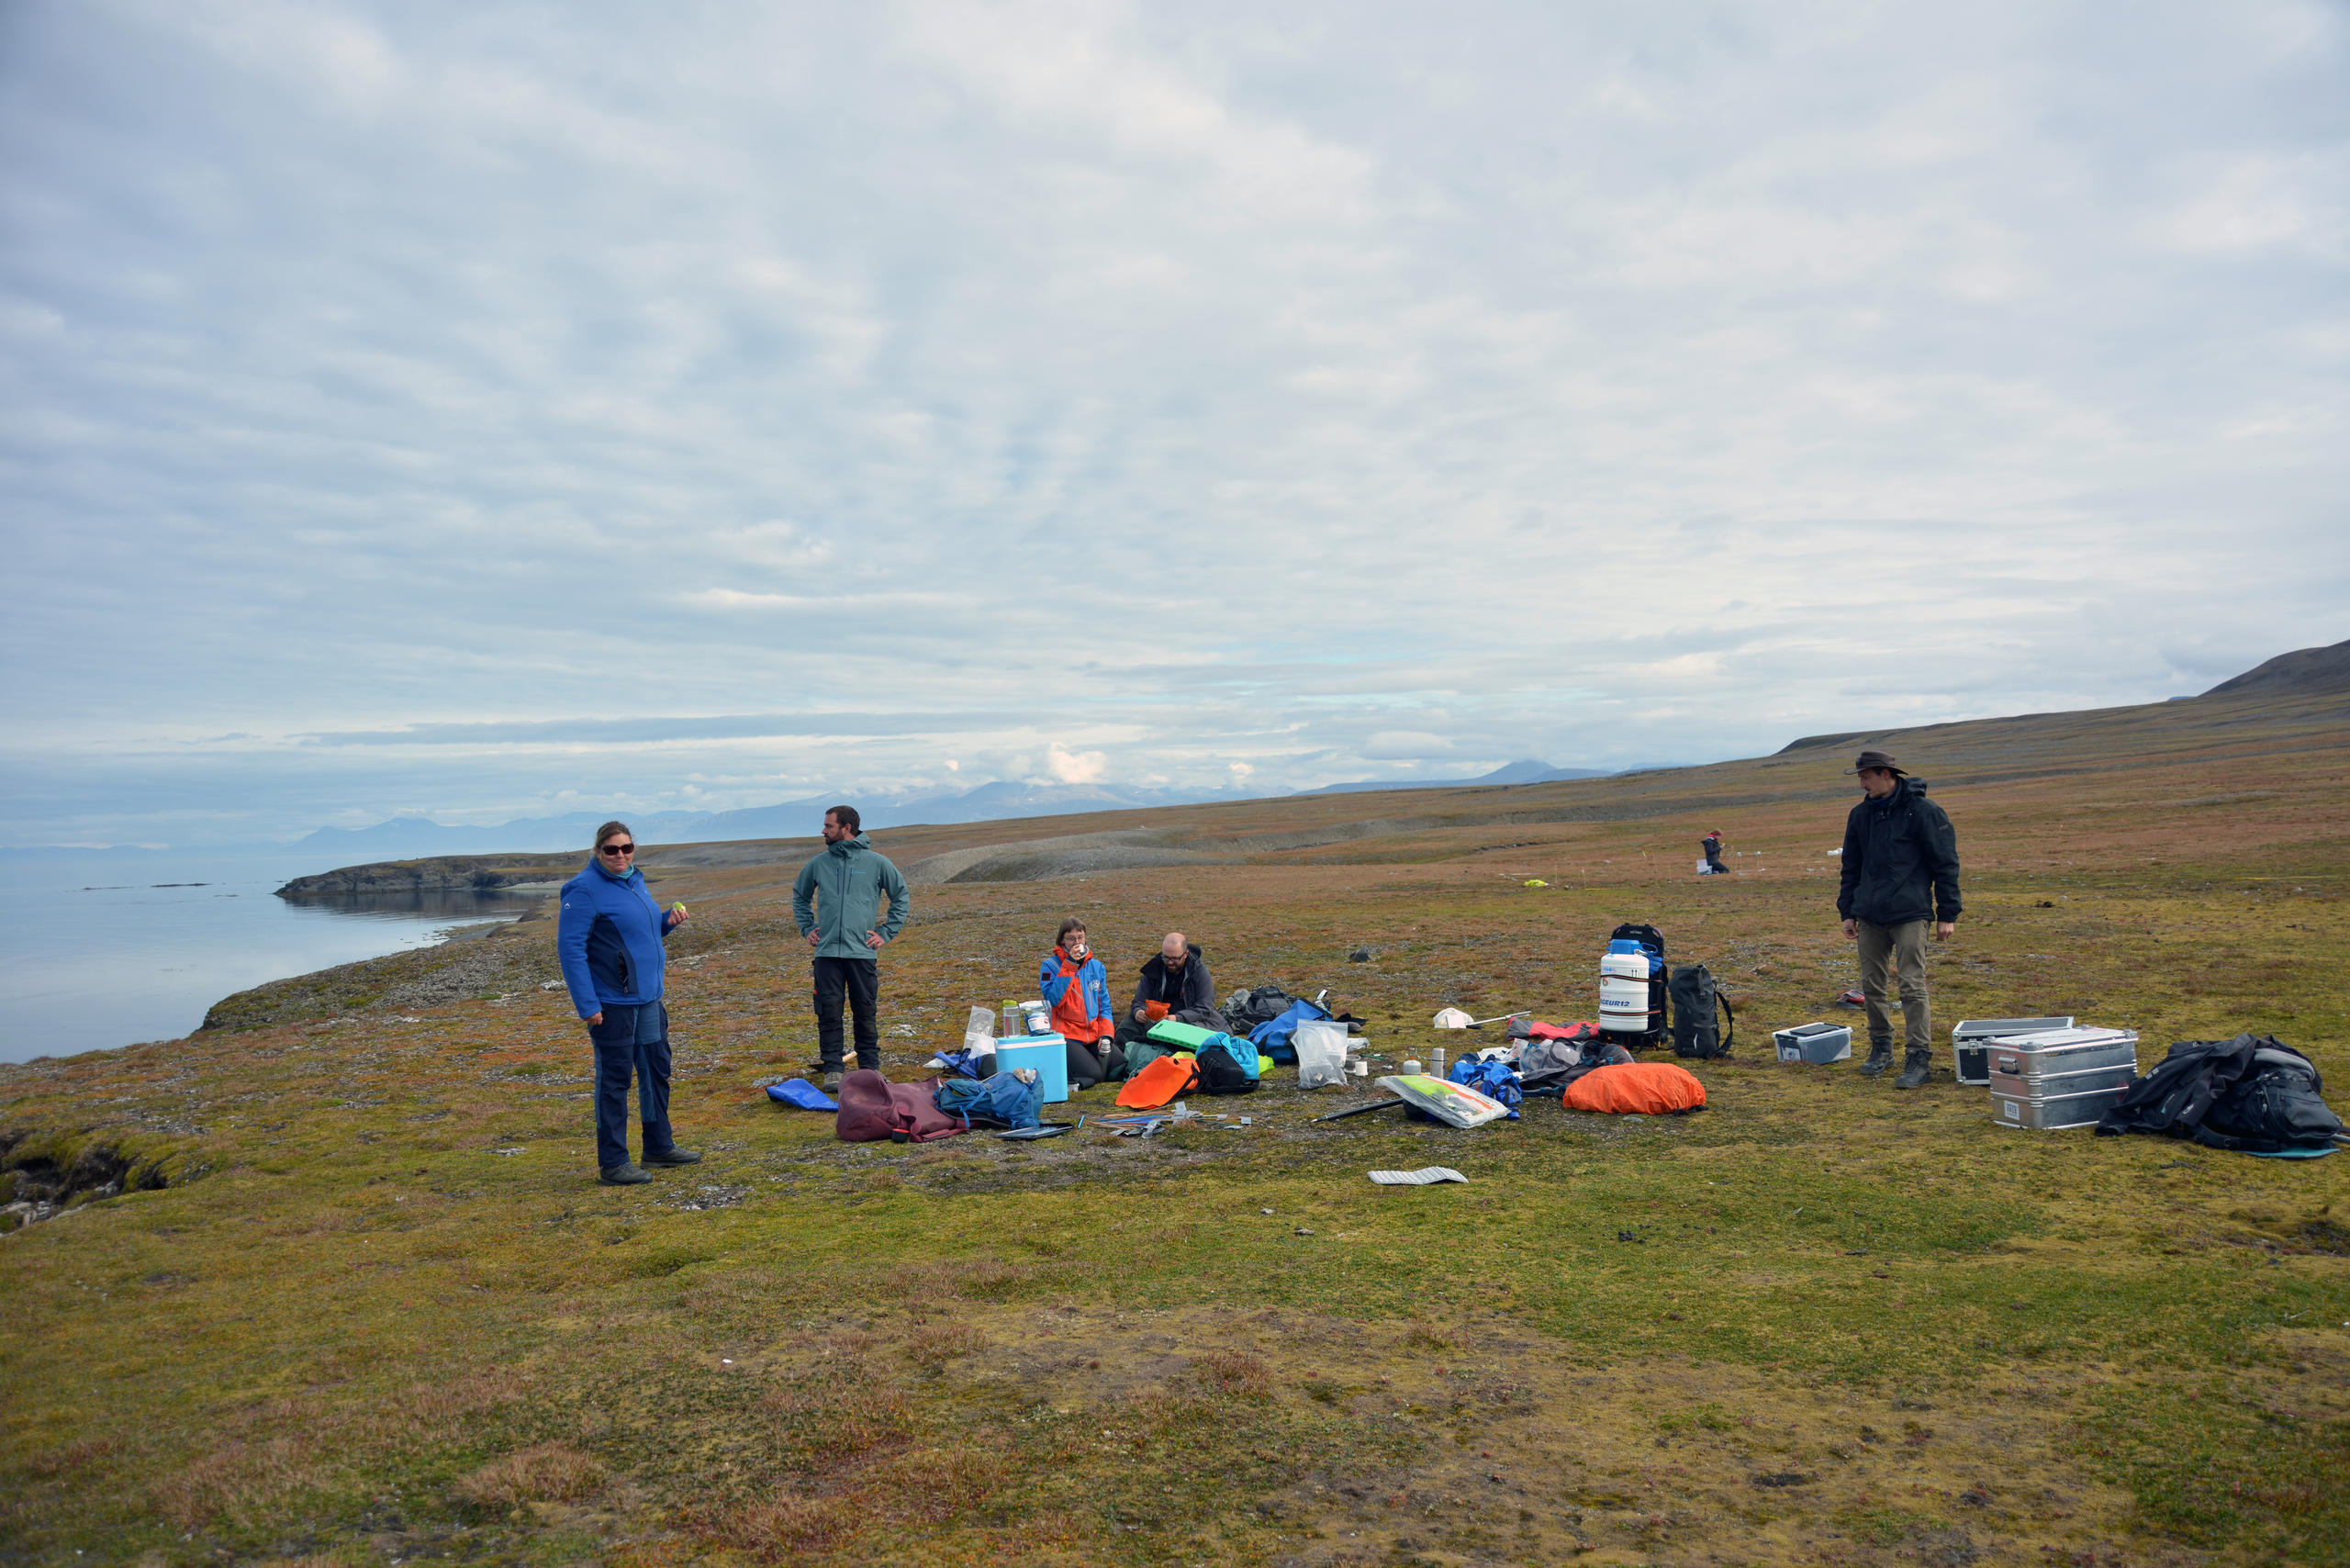 Our basecamp at one of the sites where the microbiological samples were processed